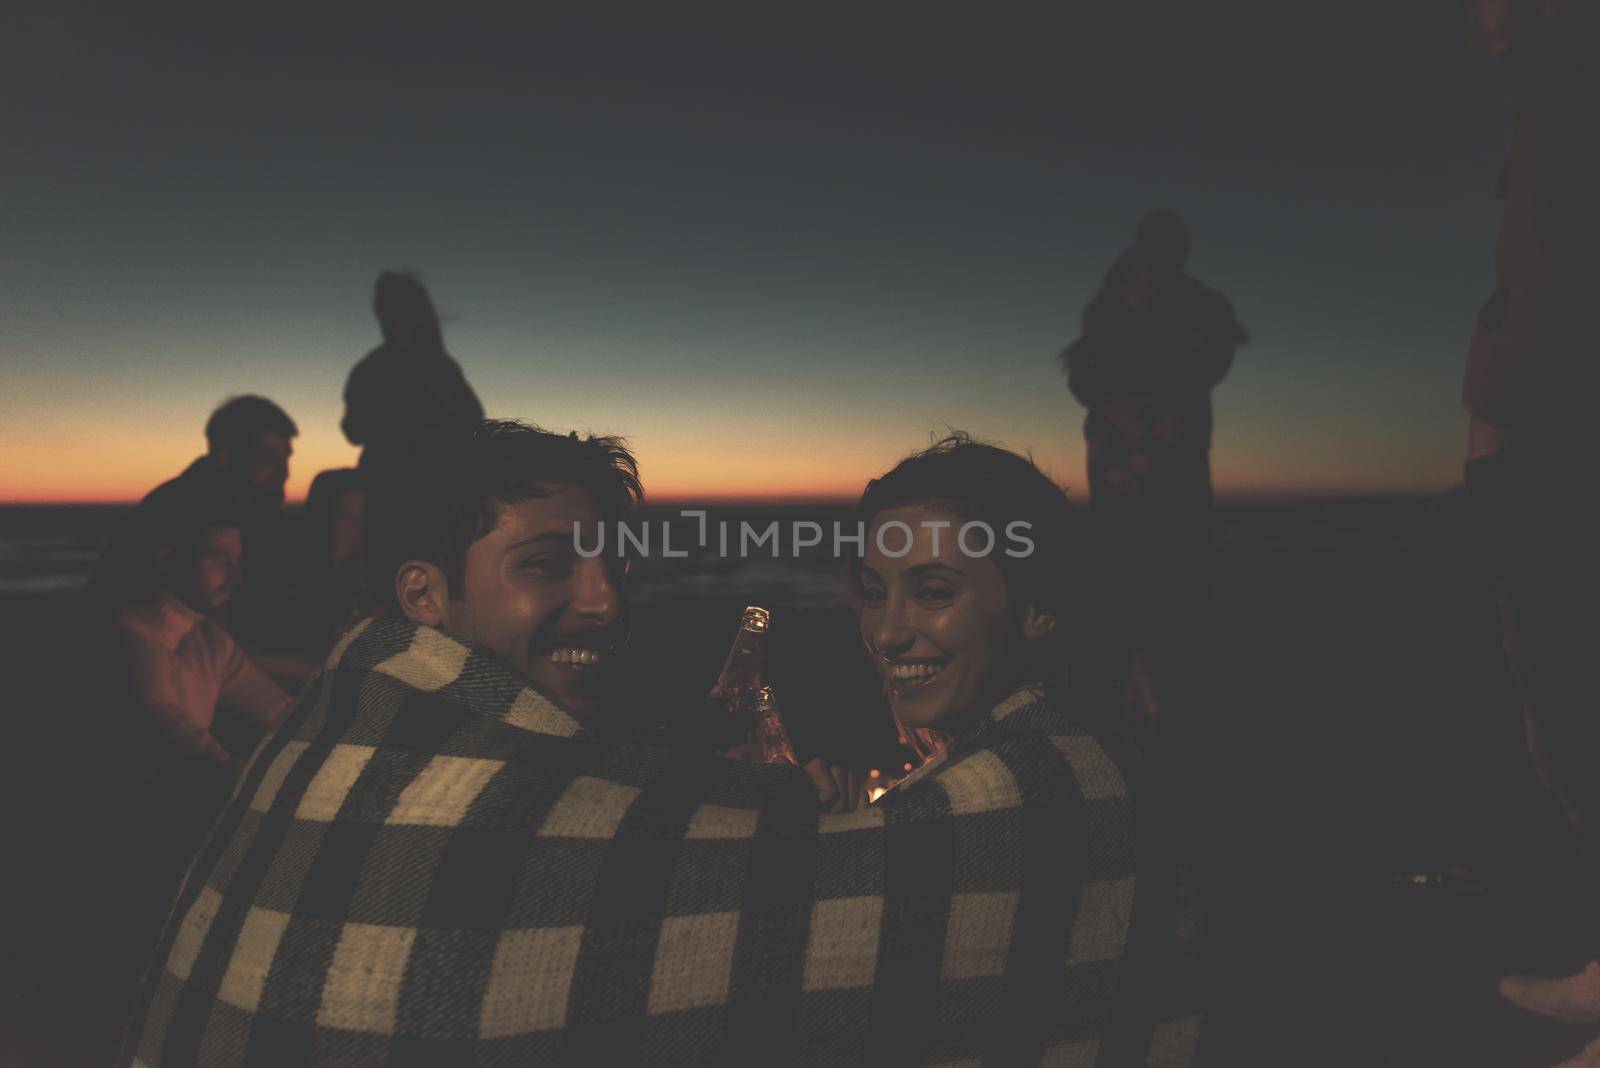 Young Couple enjoying with friends Around Campfire on The Beach At sunset drinking beer